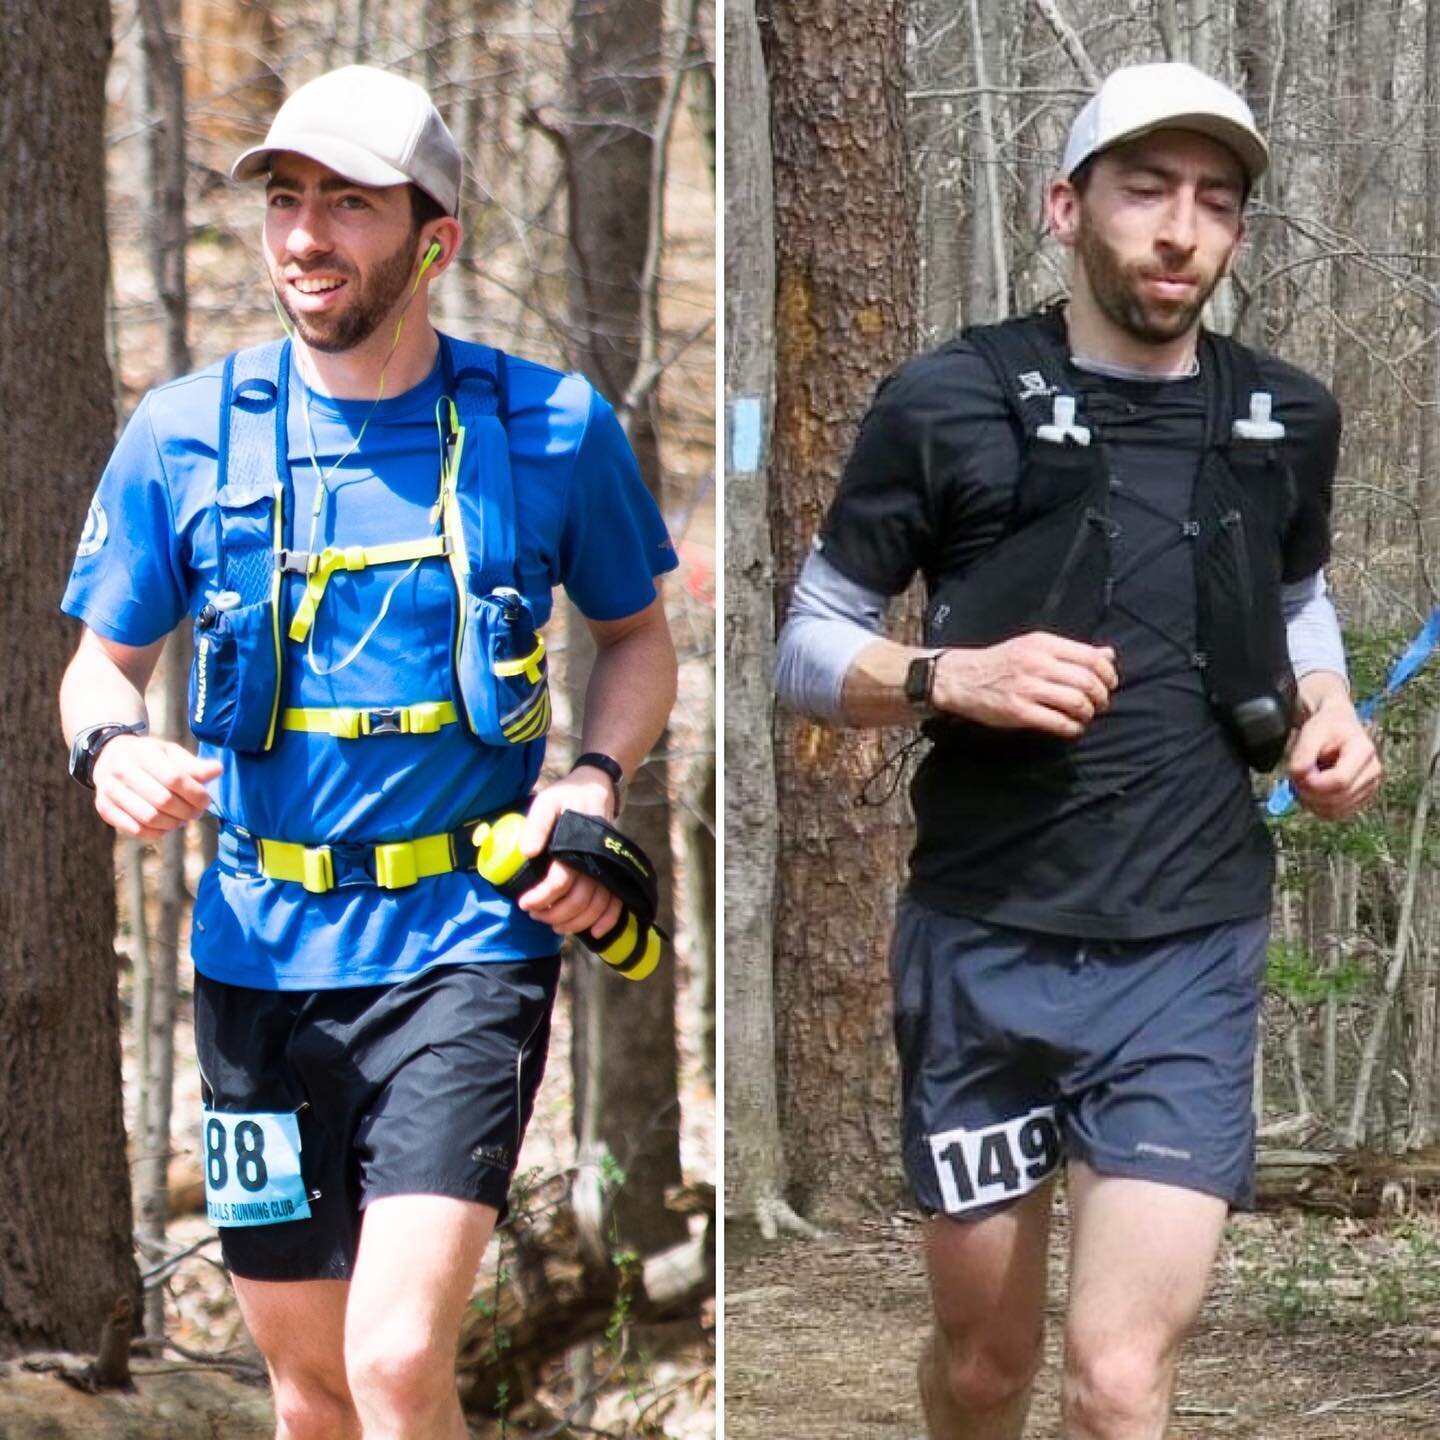 2014, 2022 Bull Run Run 50 miler. Same race (and same aid station), eight years apart. 

Our reasons for doing a thing change, and so do we. Back then, I ran my first ultramarathon to see if I could go that far. The mindset was about expansion. But t